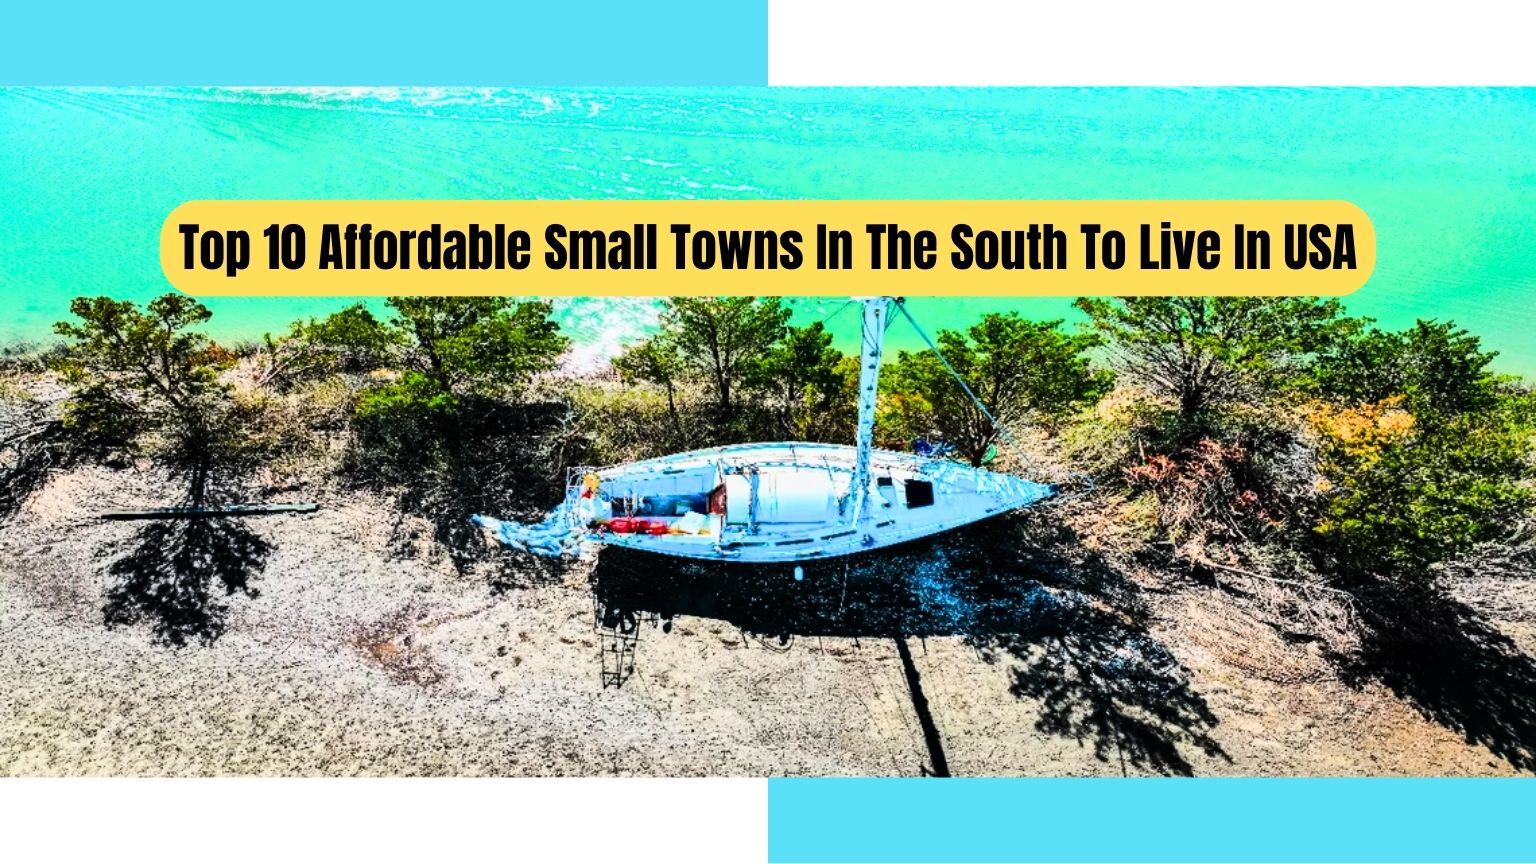 Affordable small towns in the south to live in usa, Top 10 affordable small towns in the south to live in usa, Most affordable small towns in the south to live in usa, Best affordable small towns in the south to live in usa, Top 10 affordable small towns in the south to live in,